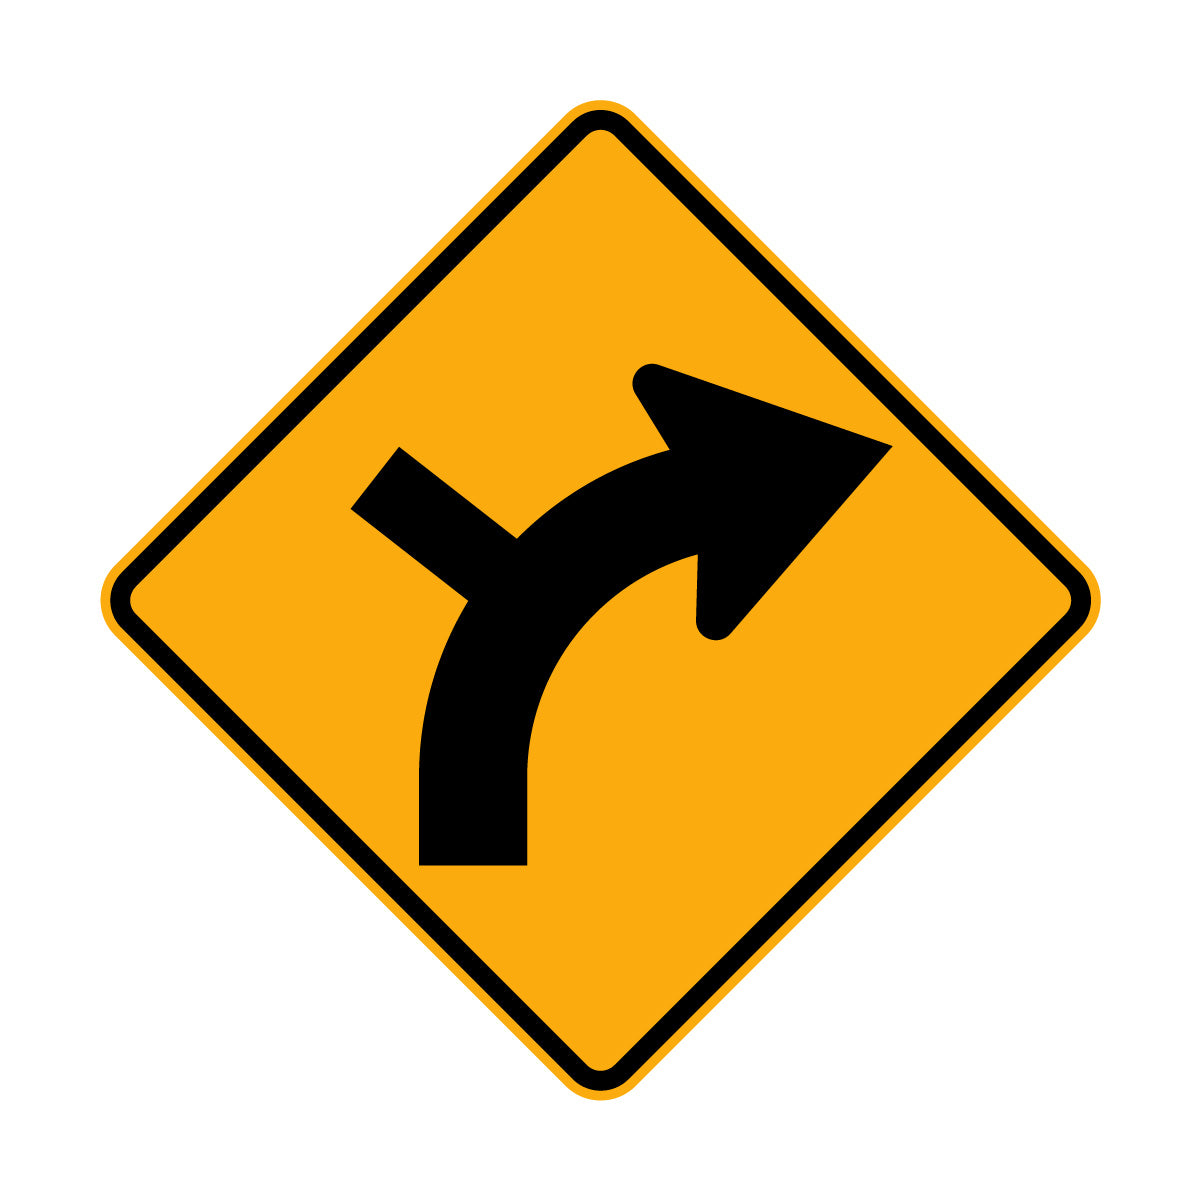 Warning: Curved Road Side Road Sign